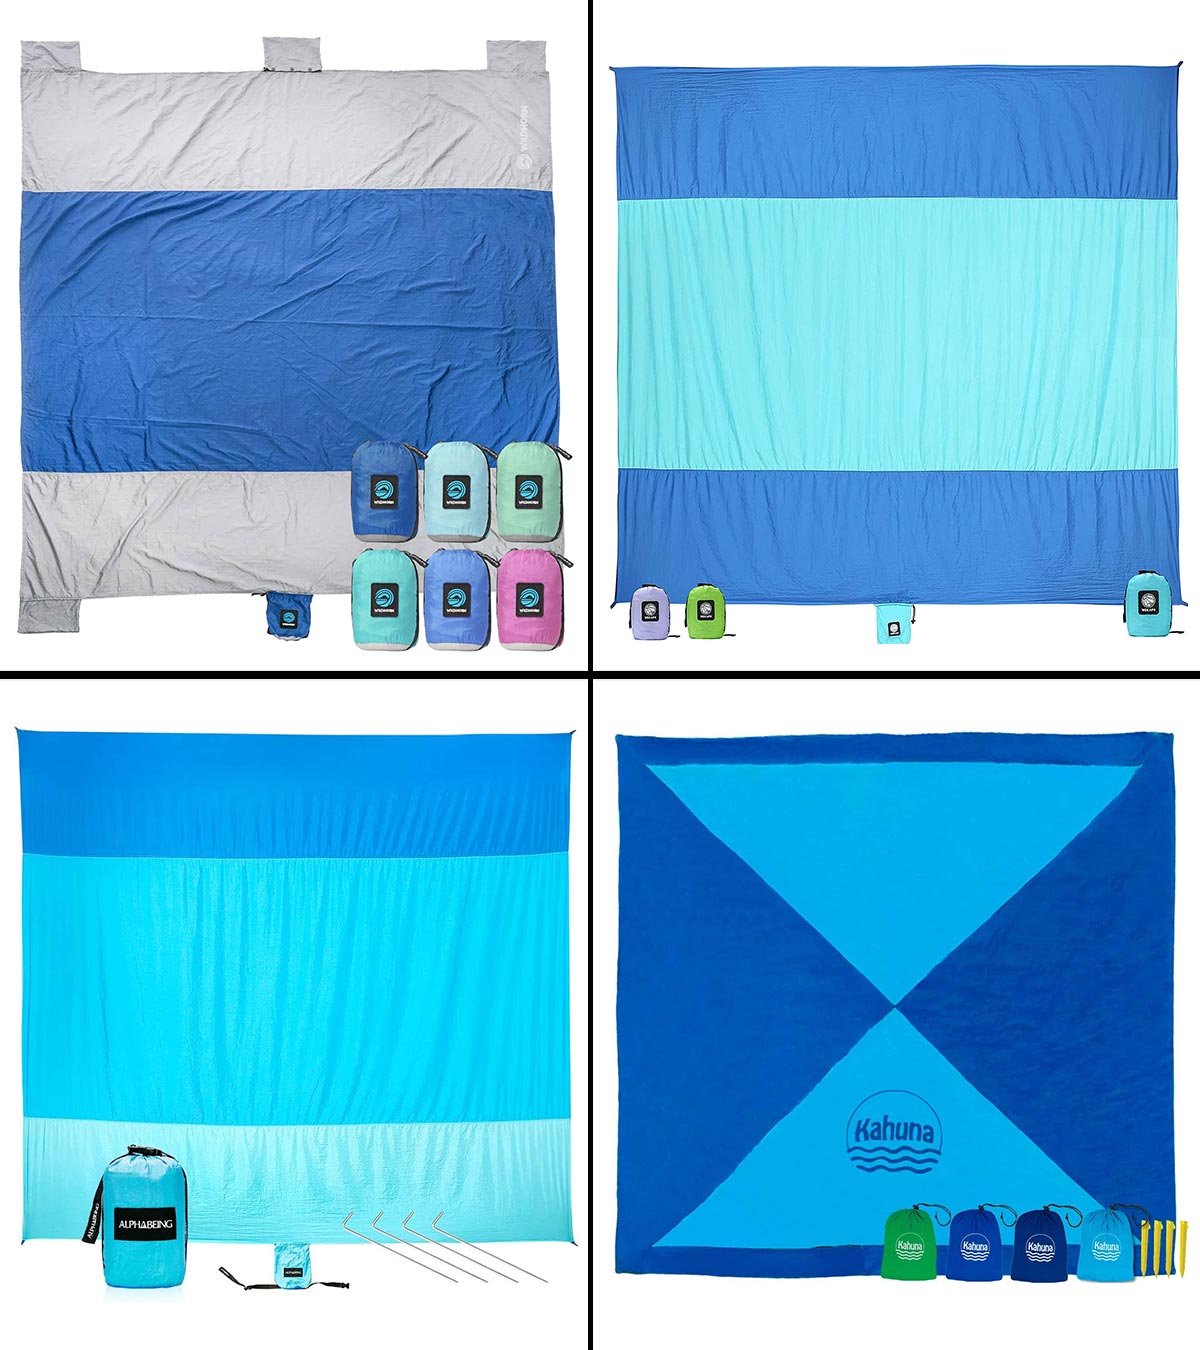 Hiwoss Sand Proof Beach Blanket,Waterproof Sand Free Beach Mat Large 71”x 60” with Corner Pockets,Portable Mesh Bag for Beach Festival,Picnic,Travel and Outdoor Camping,Watercolor Blue and Teal